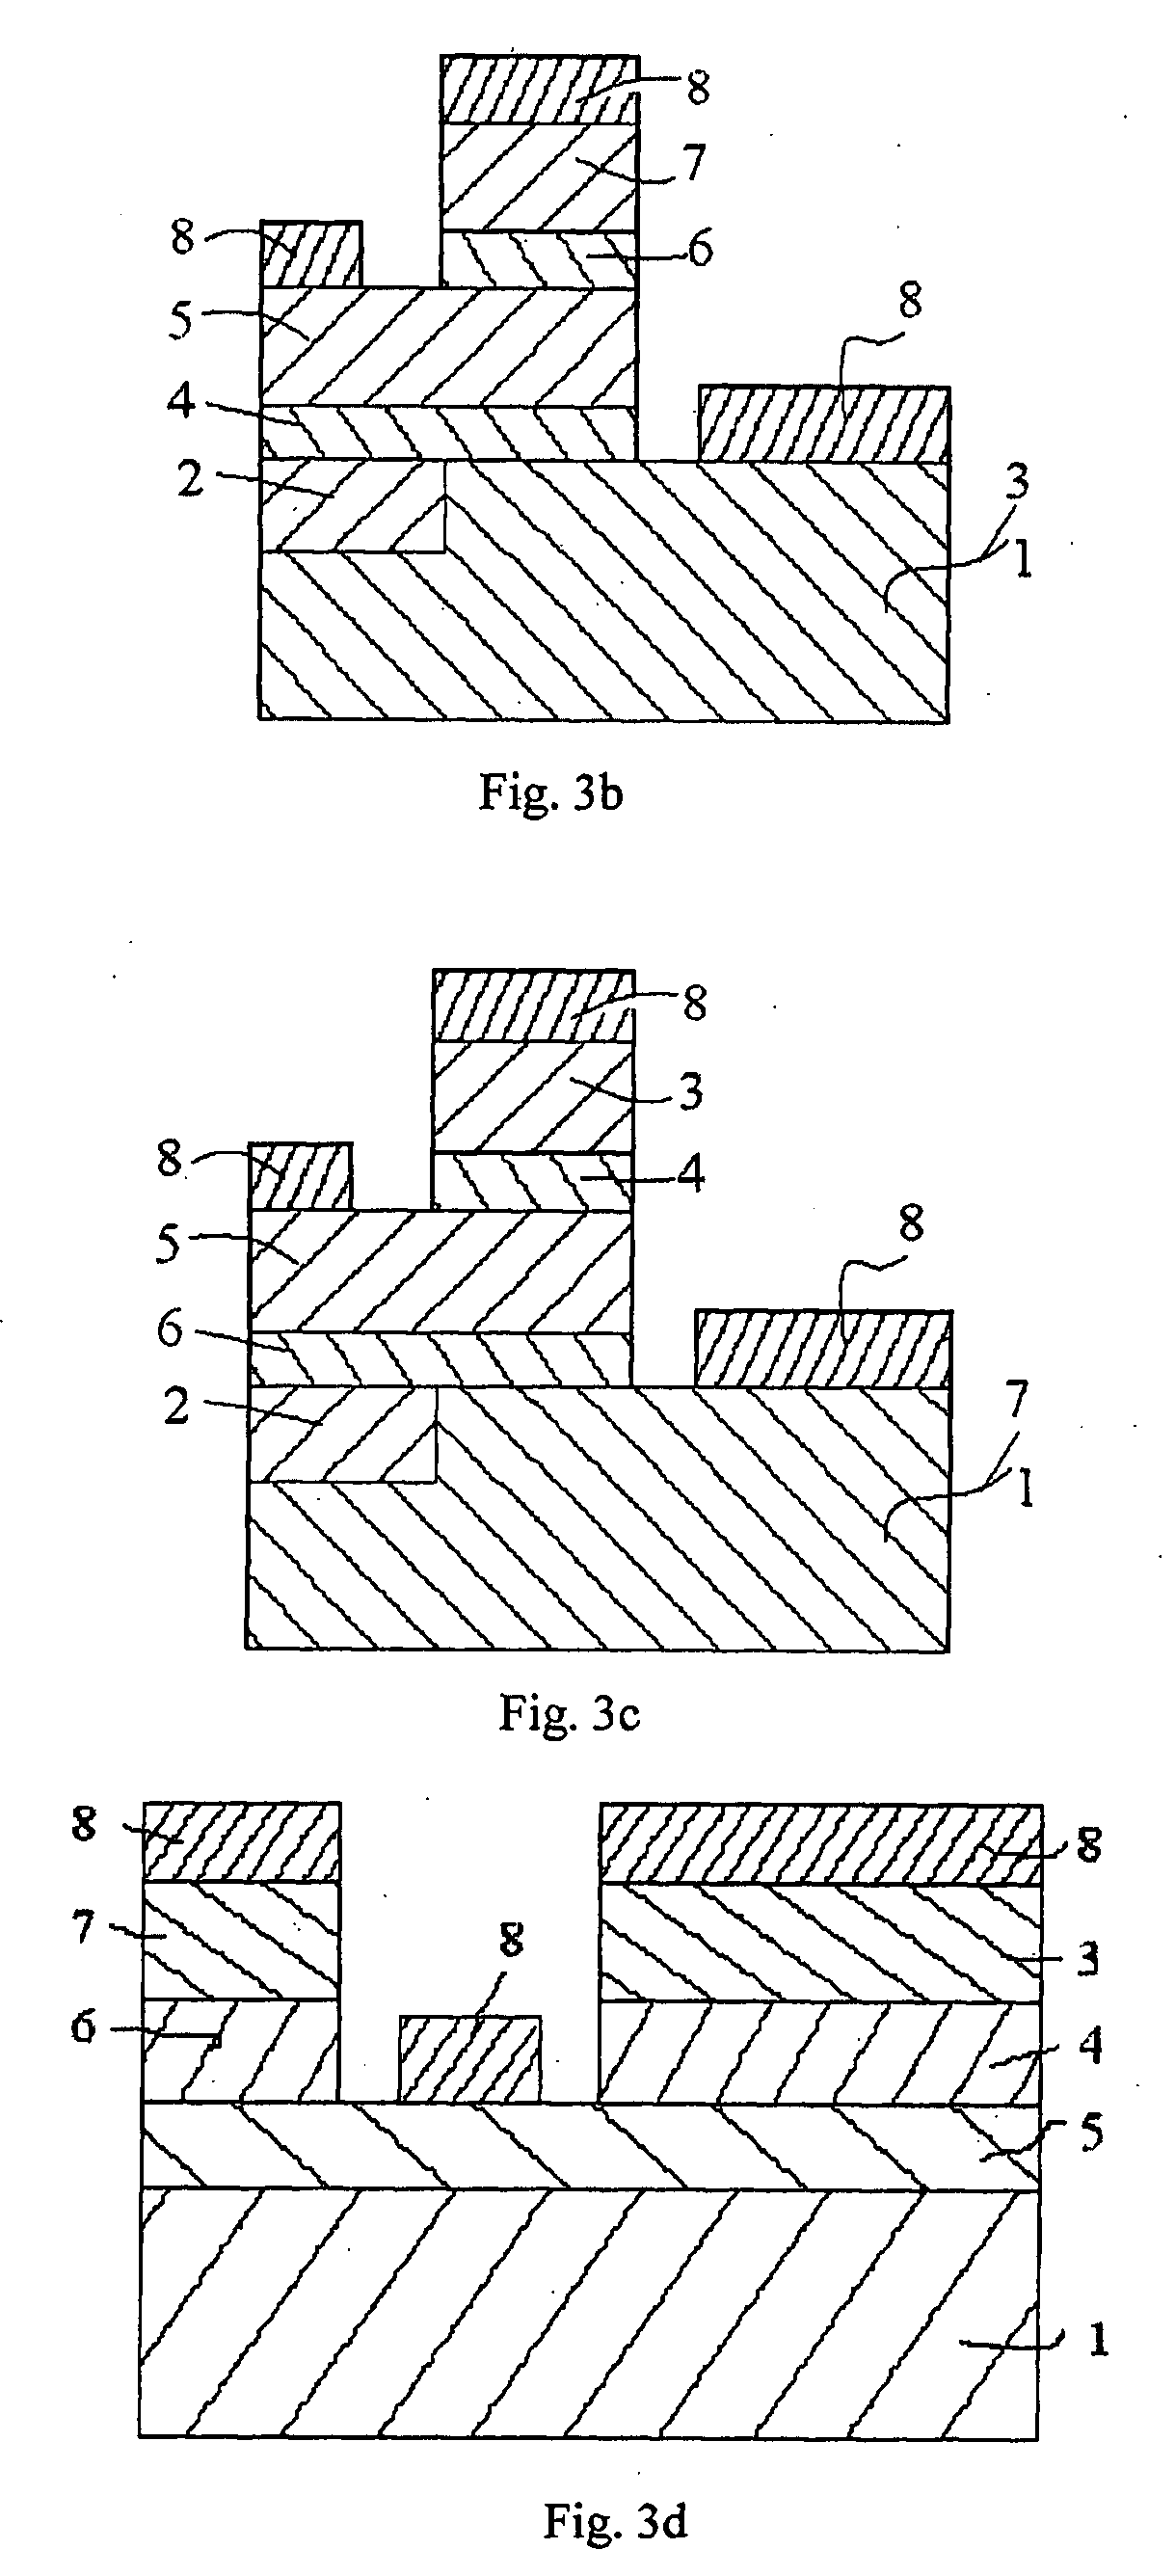 Transistor Based on Resonant Tunneling Effect of Double Barrier Tunneling Junctions